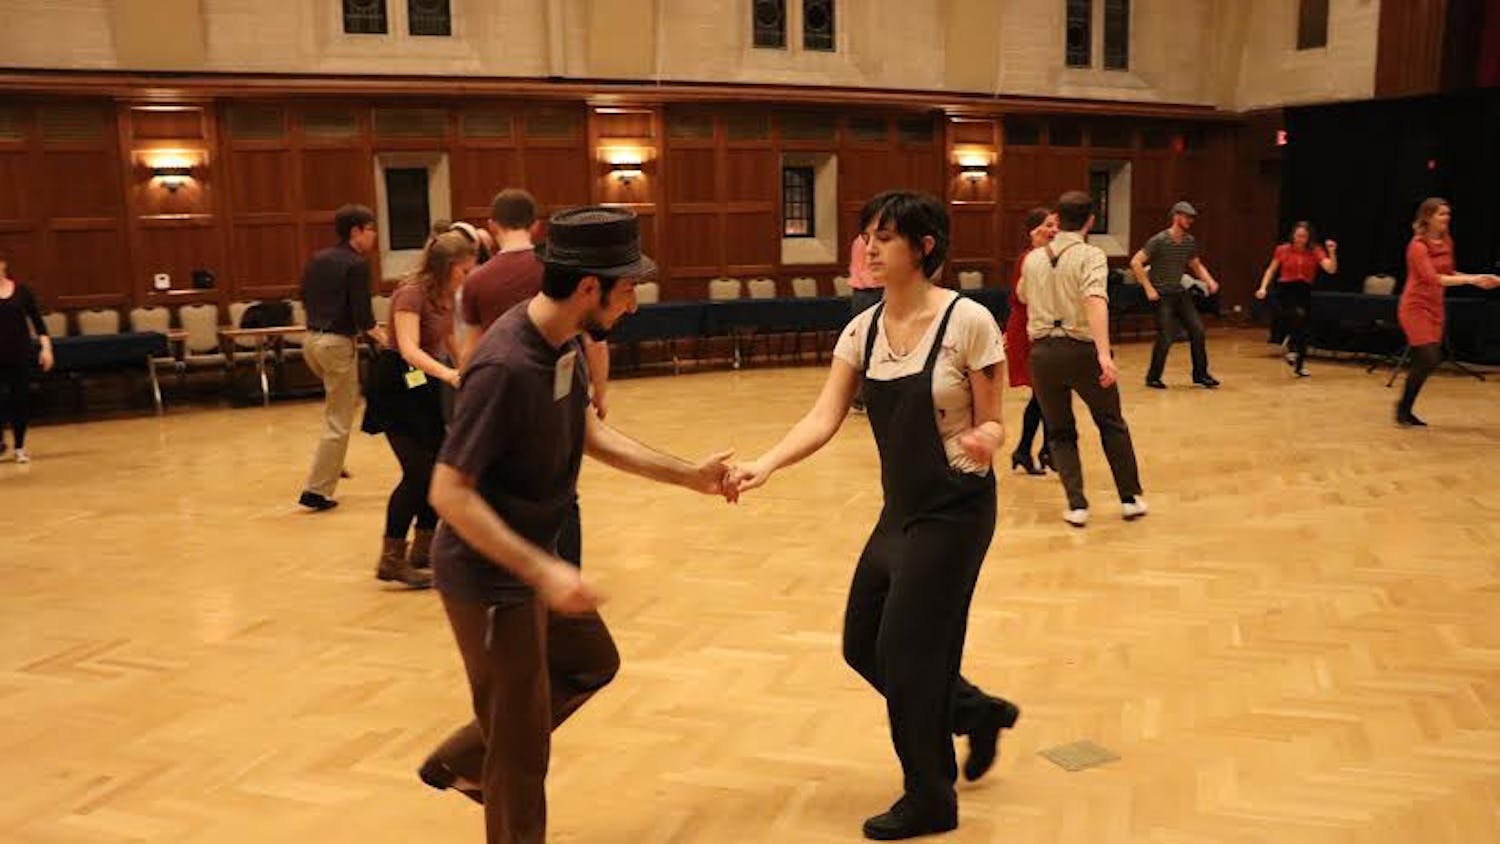 Erfan Sadeqi Azer dances with Jenna Richards during the Swing Dance Club callout meeting Monday. Azer, the Swing Dance Club's president, danced with students interested in the club.